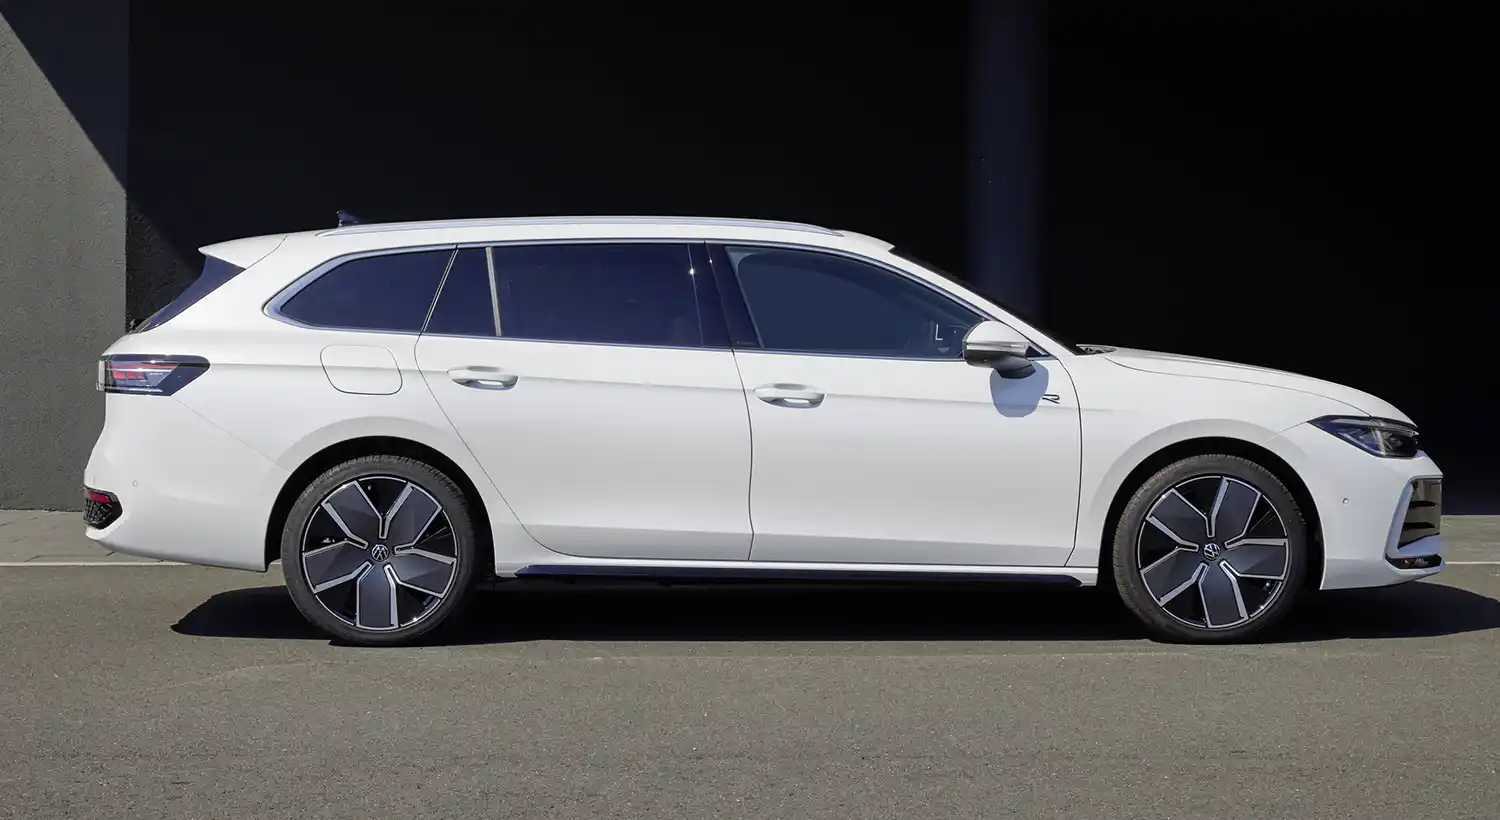 The Volkswagen business class: world premiere of the all-new Passat Variant